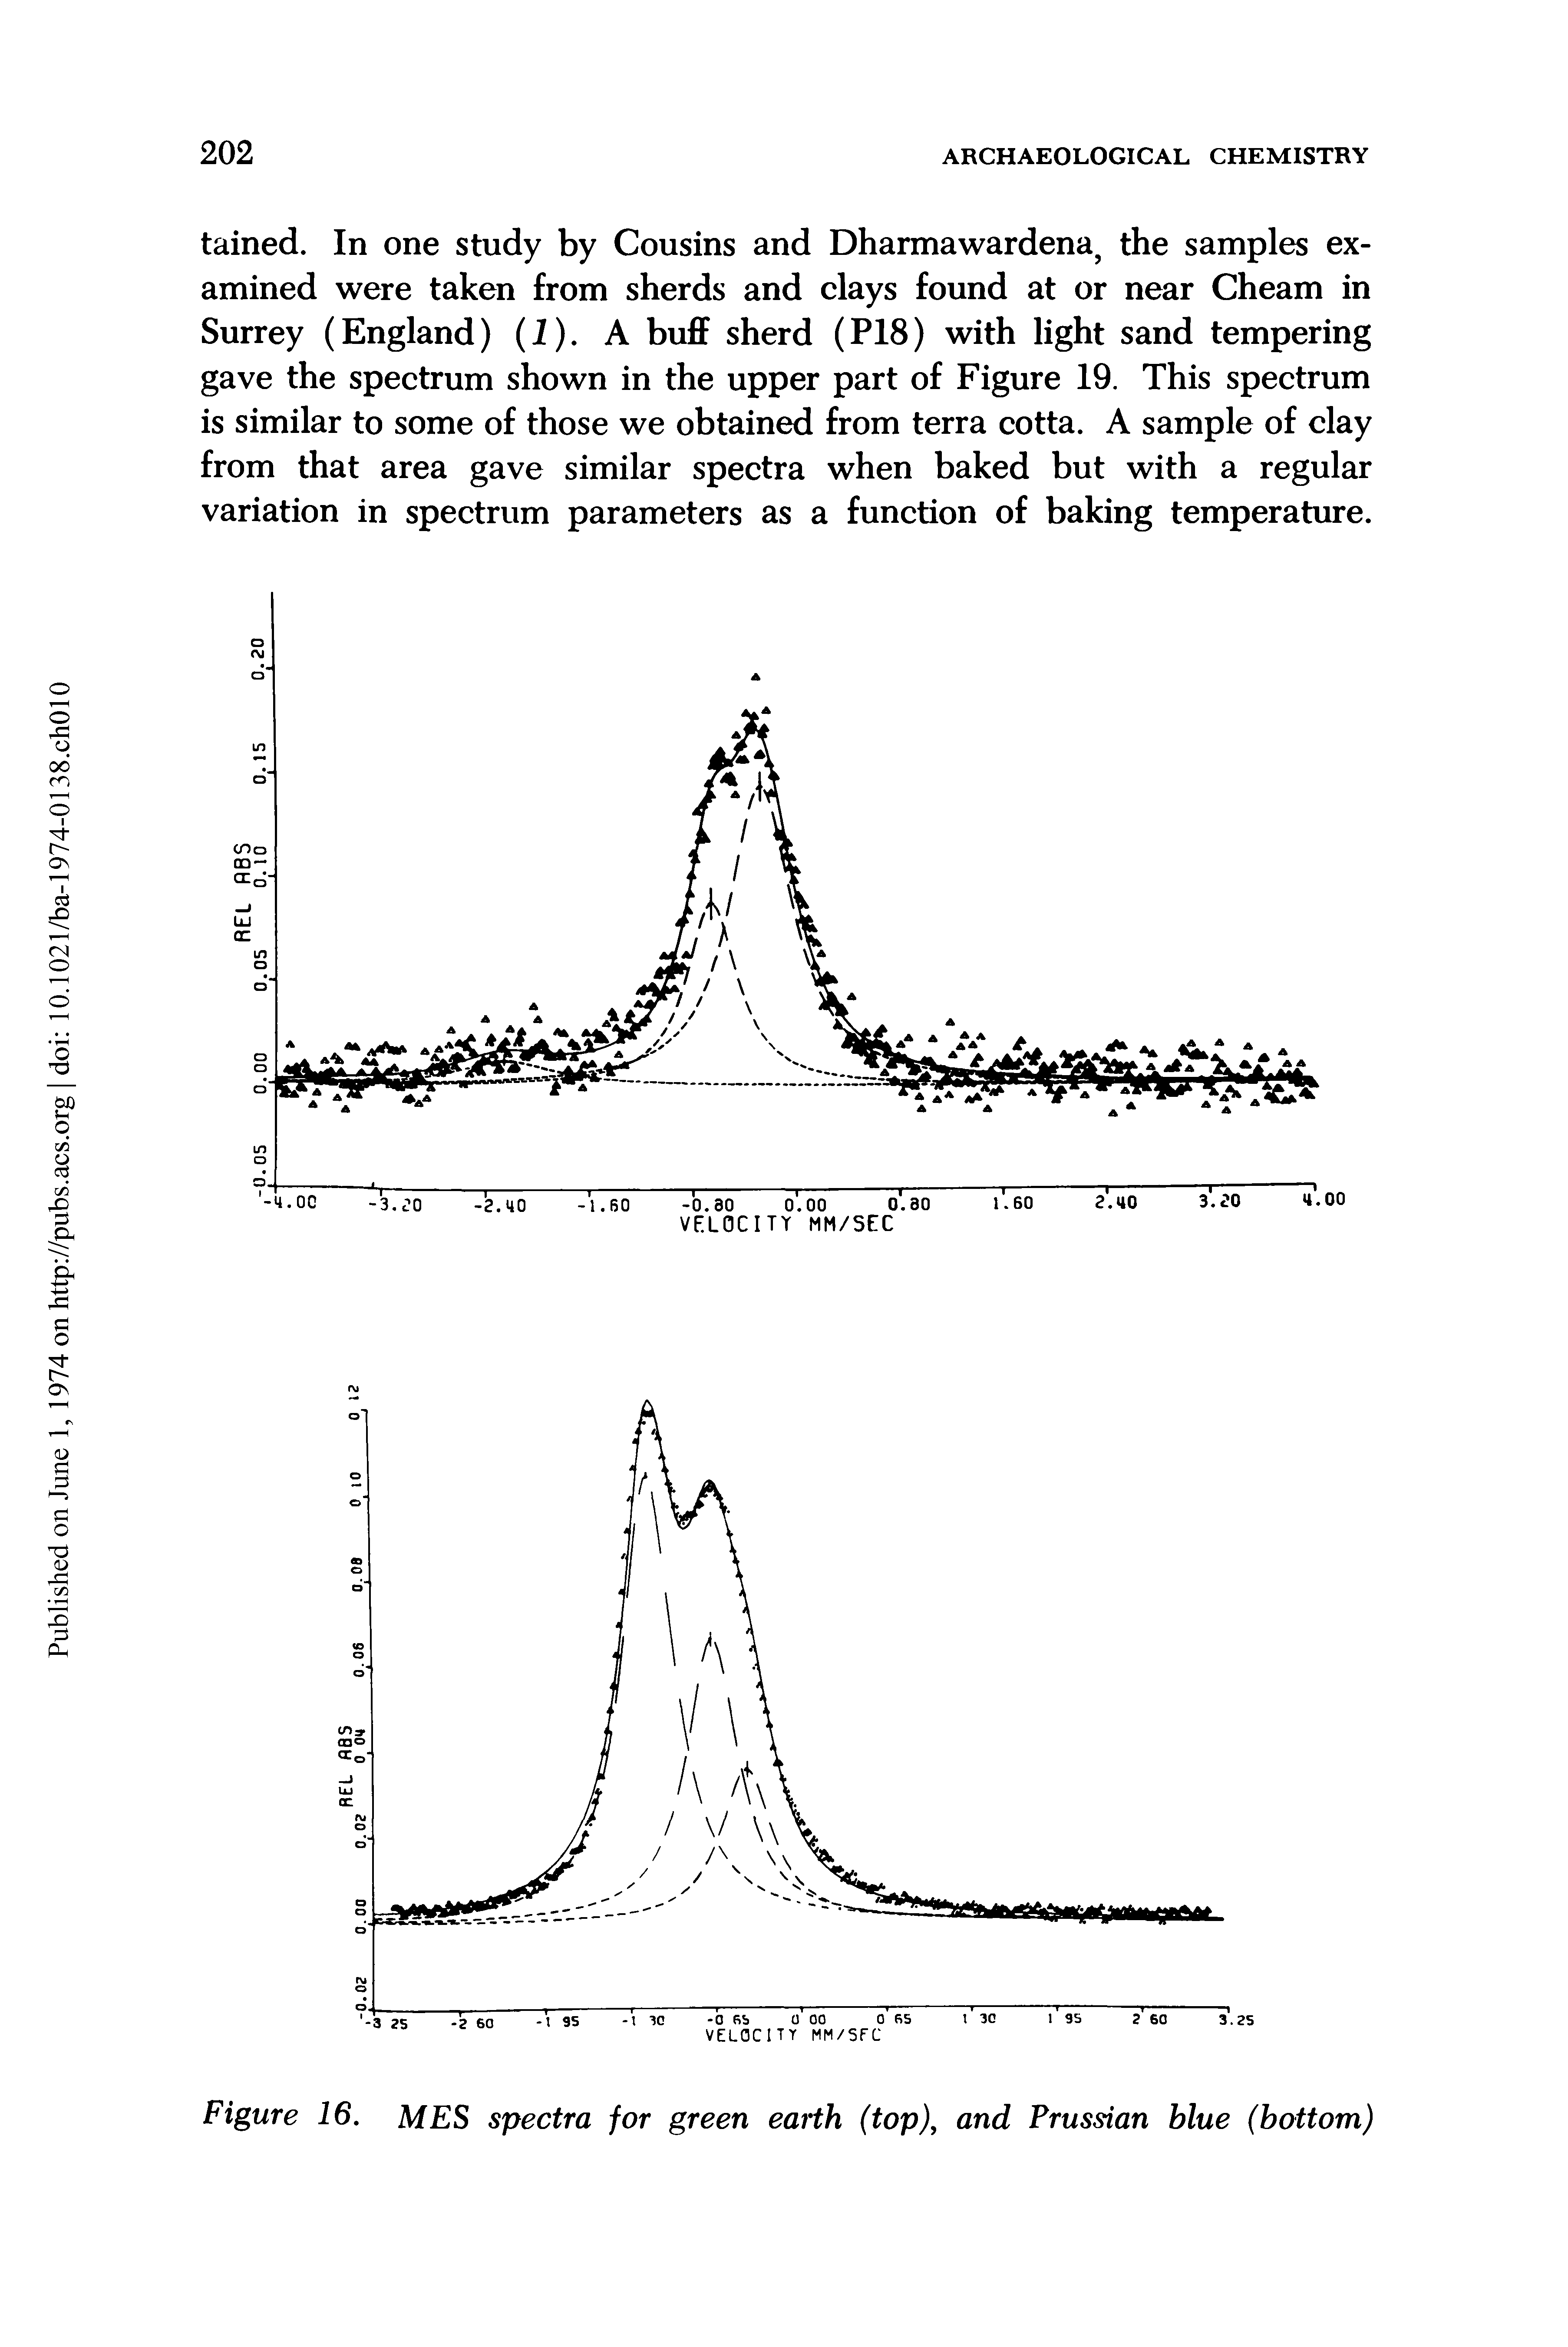 Figure 16. MES spectra for green earth (top), and Prussian blue (bottom)...